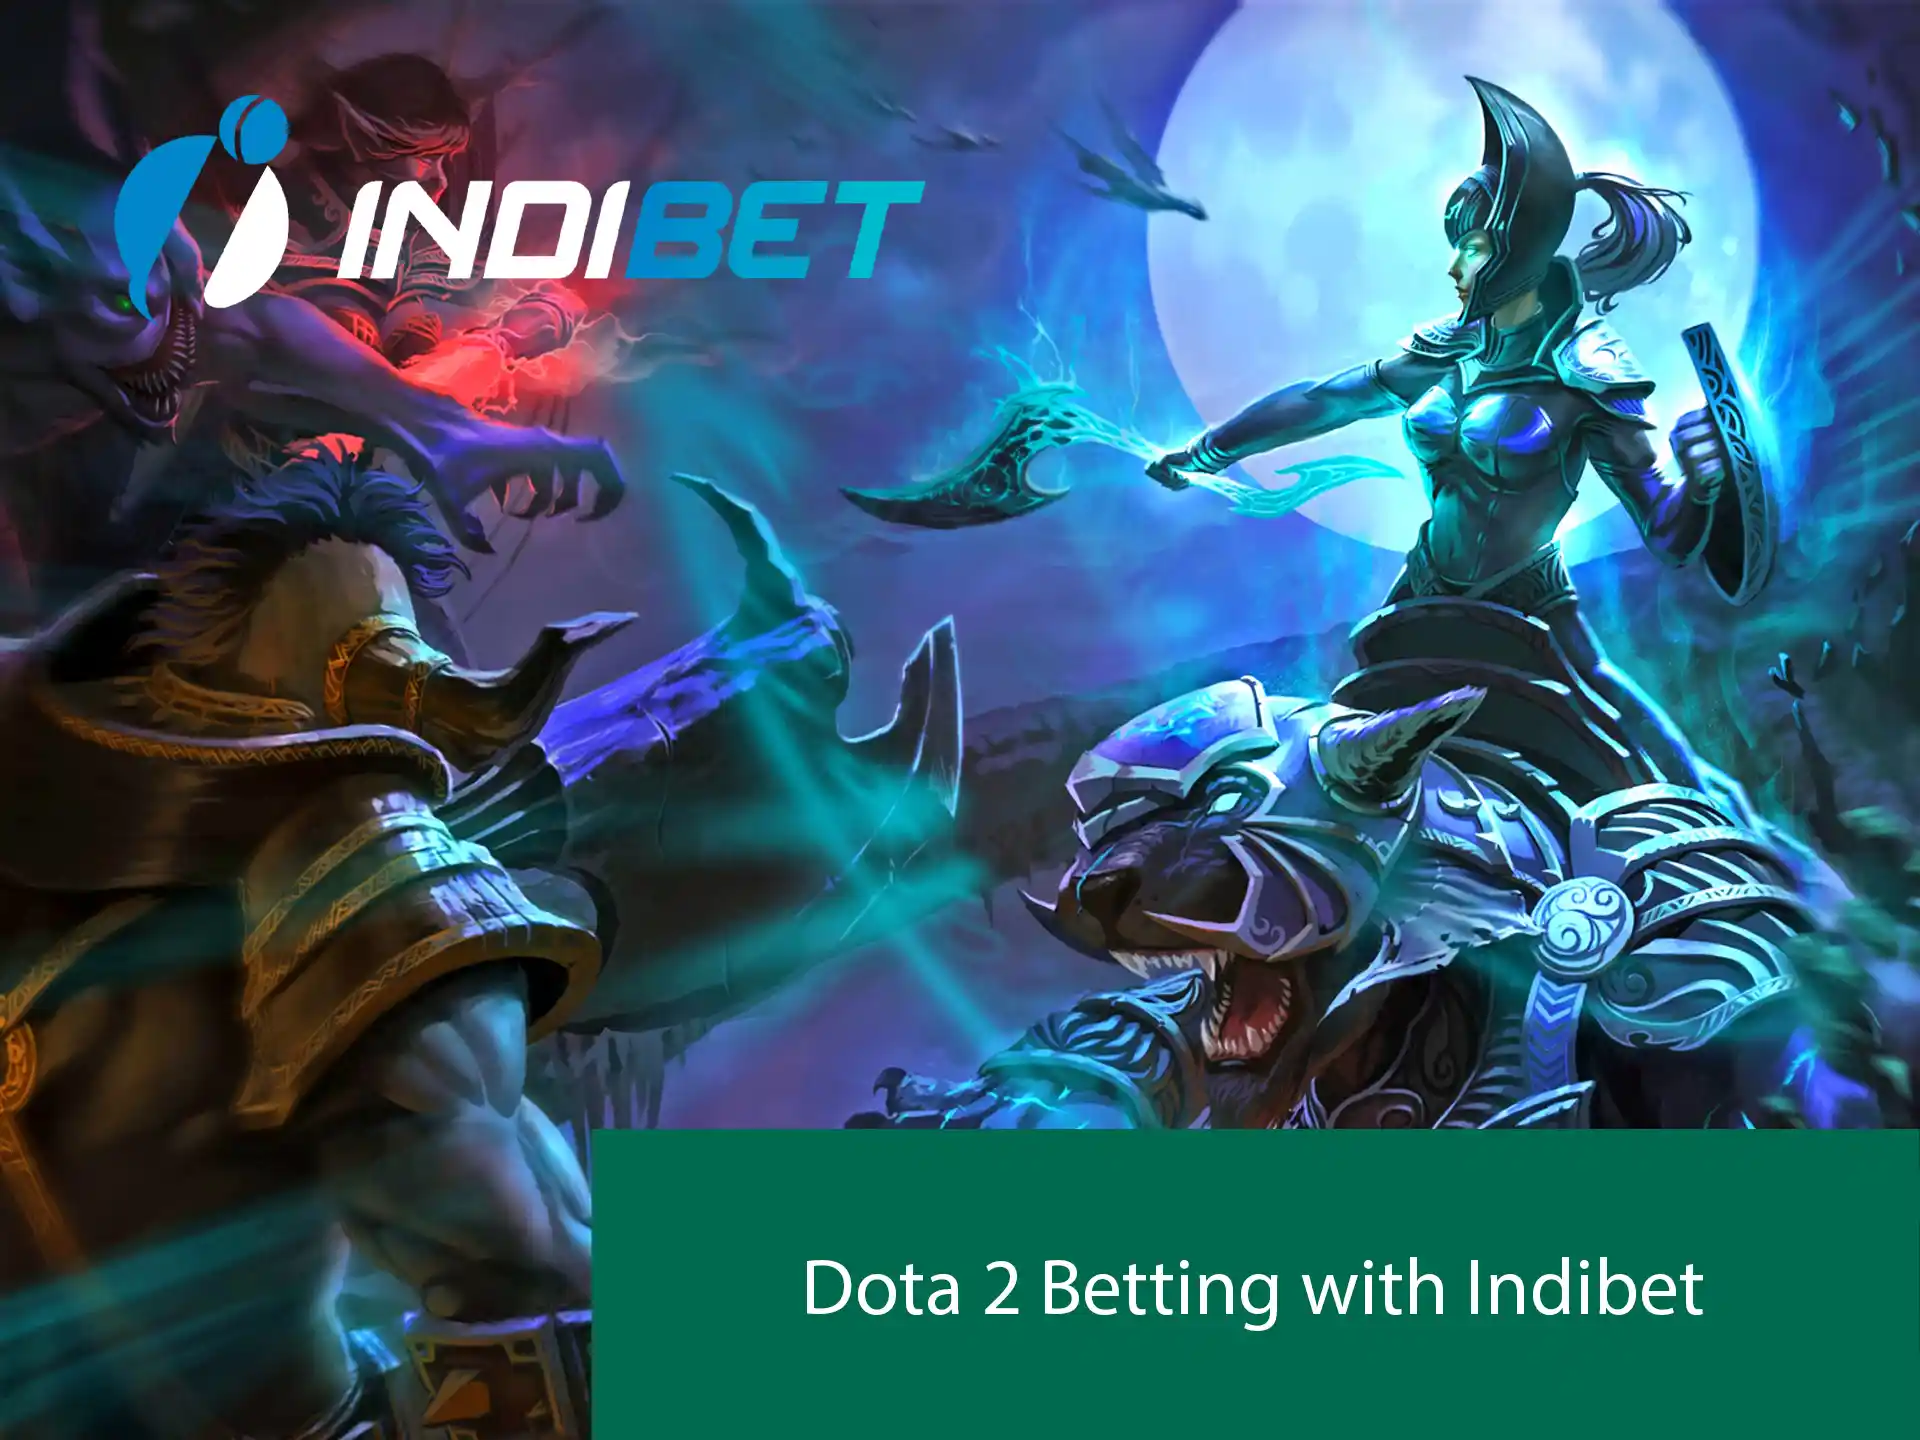 Download the Indibet app and start betting on Dota 2.